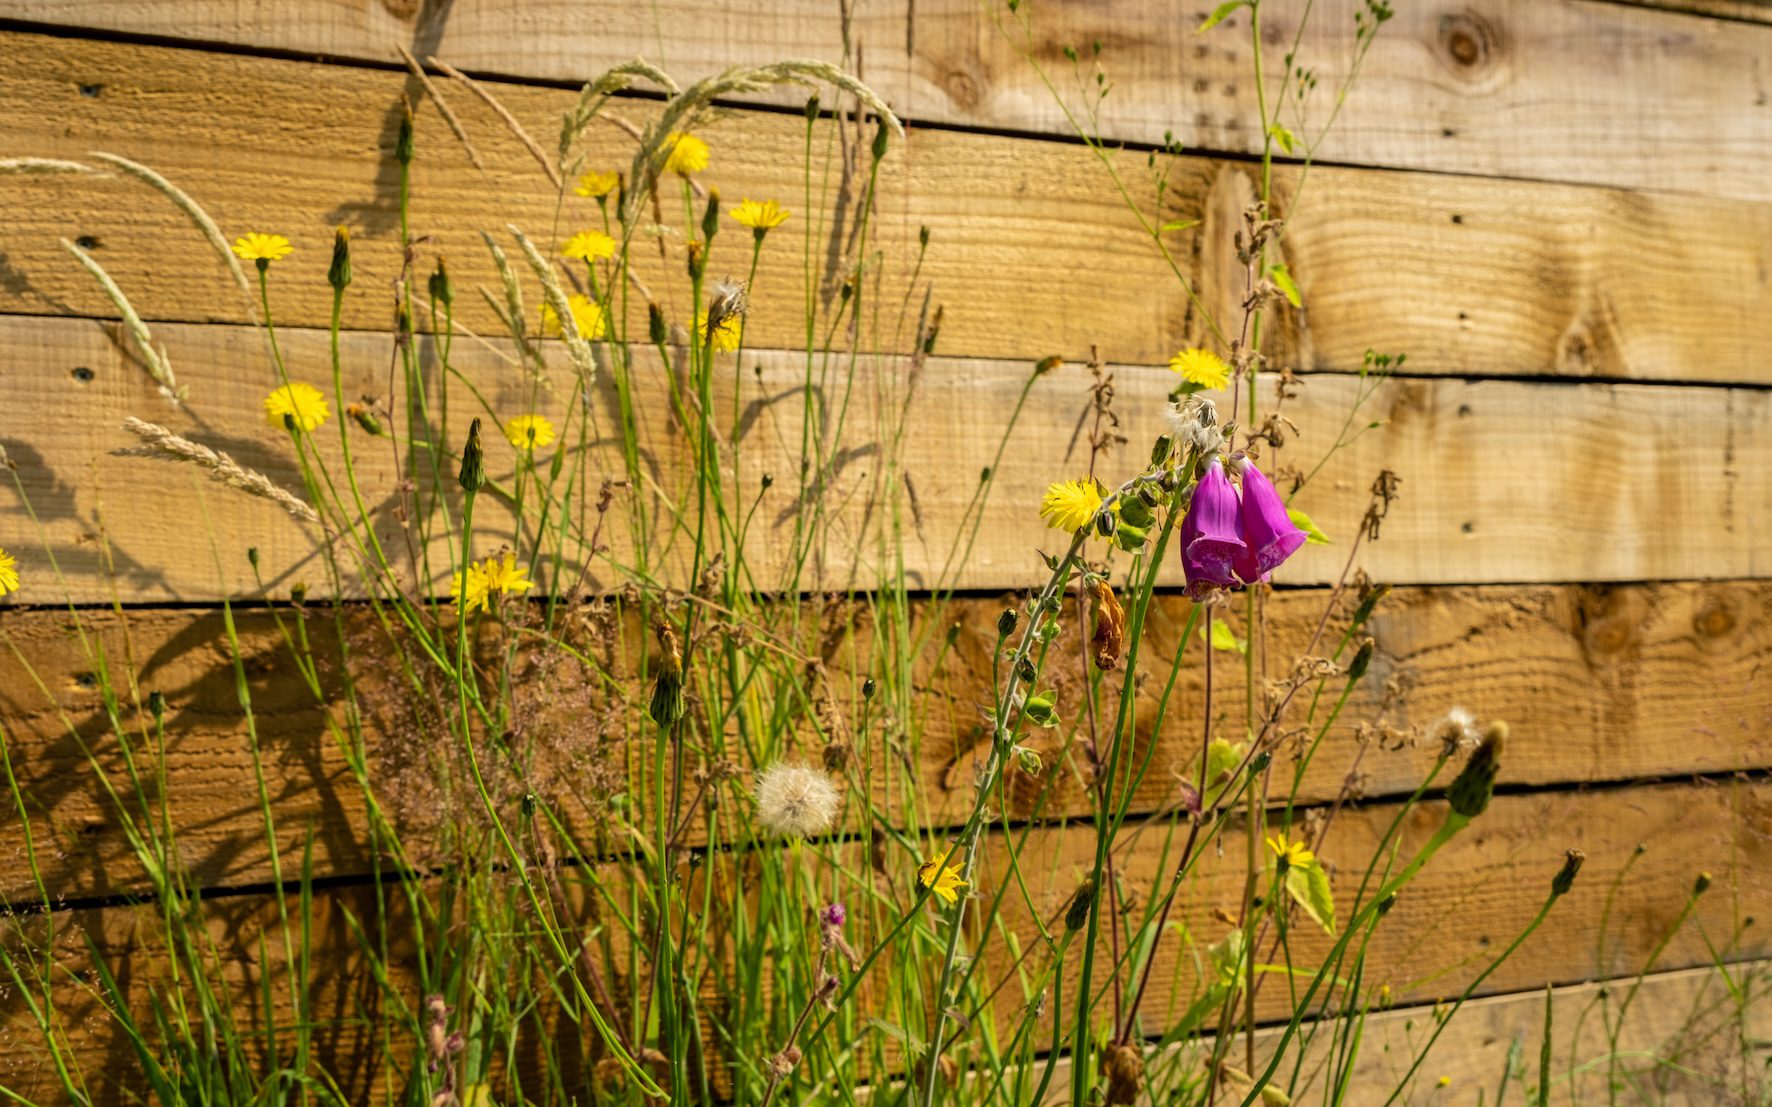 Close-up of foxgloves, dandelions and other UK wild flowers against a wooden fence in the afternoon summer sun